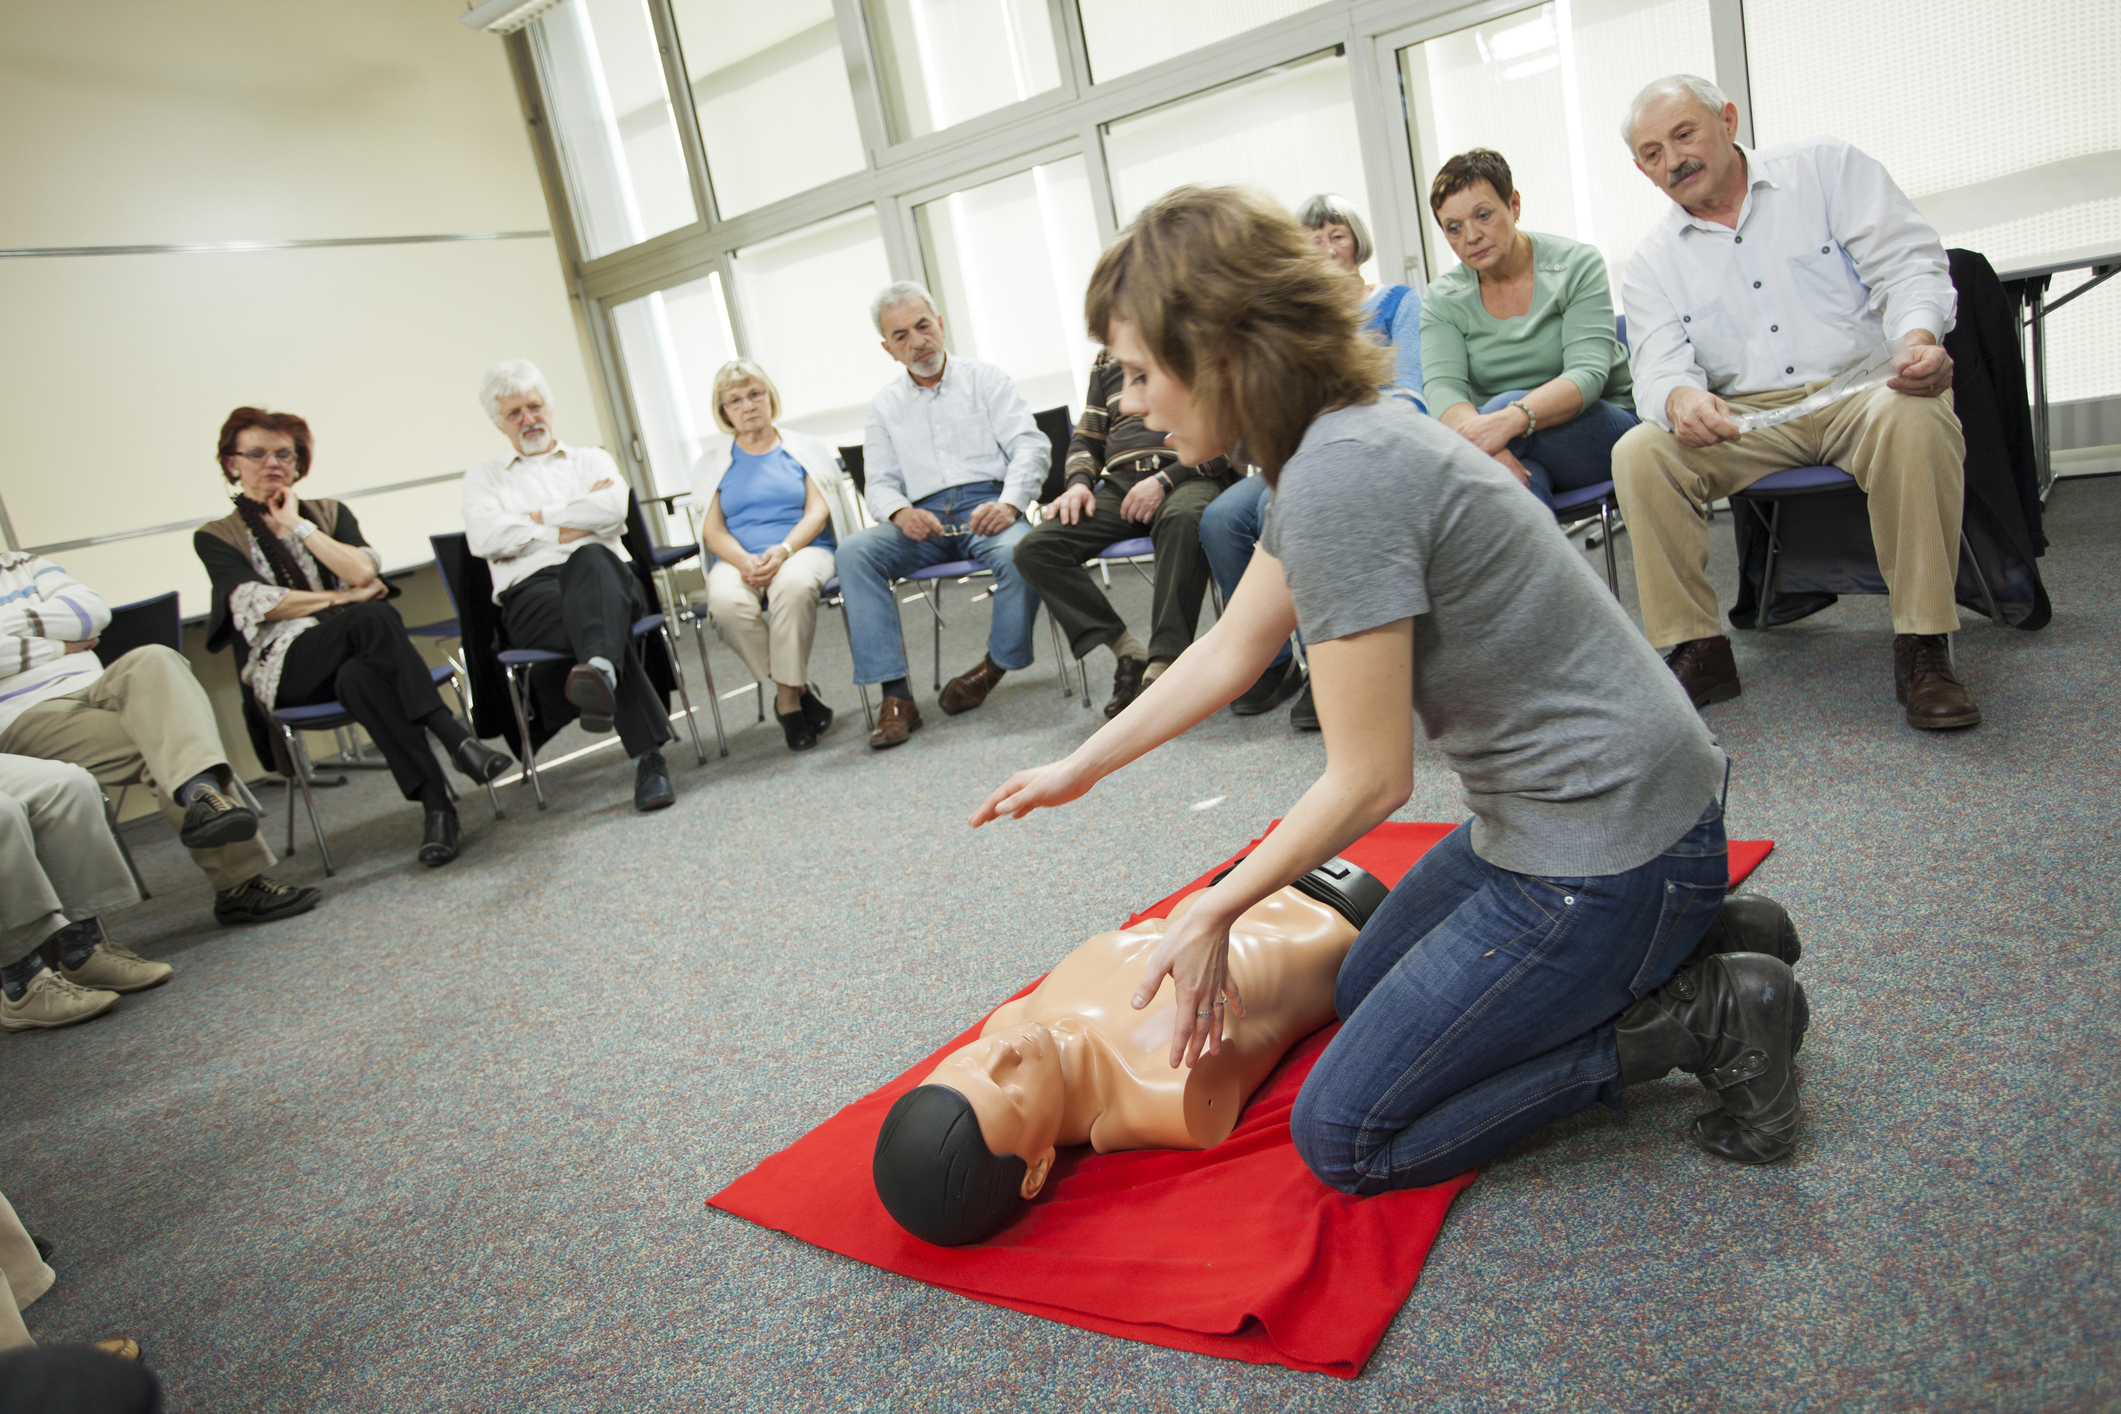 Your First Aid Team Course - Provide Basic First Aid – HLTAID002